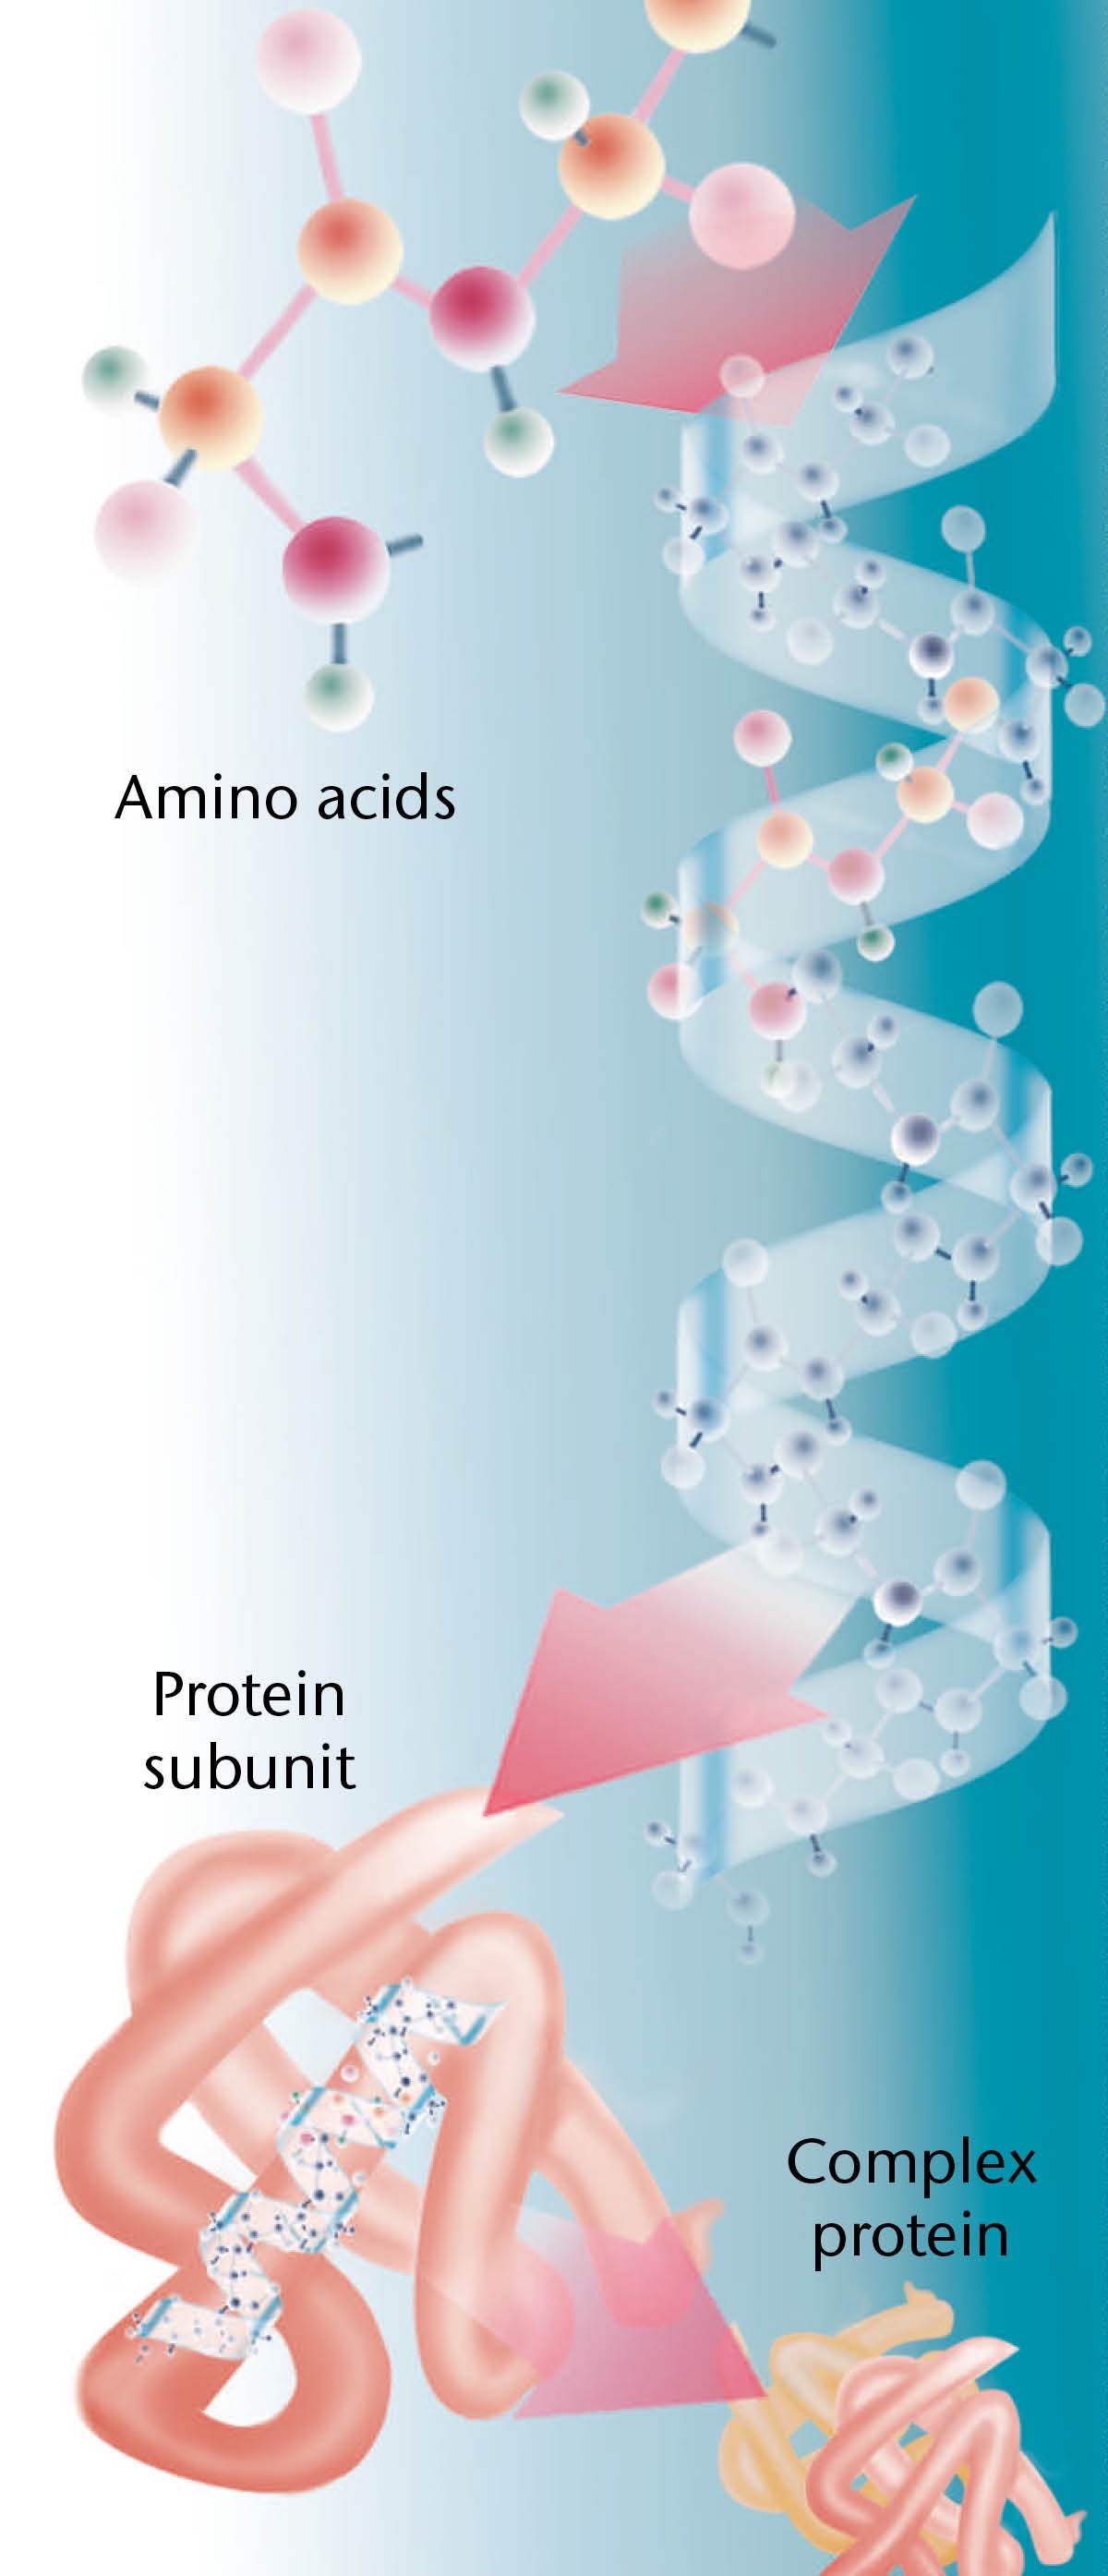 Parts of a typical protein